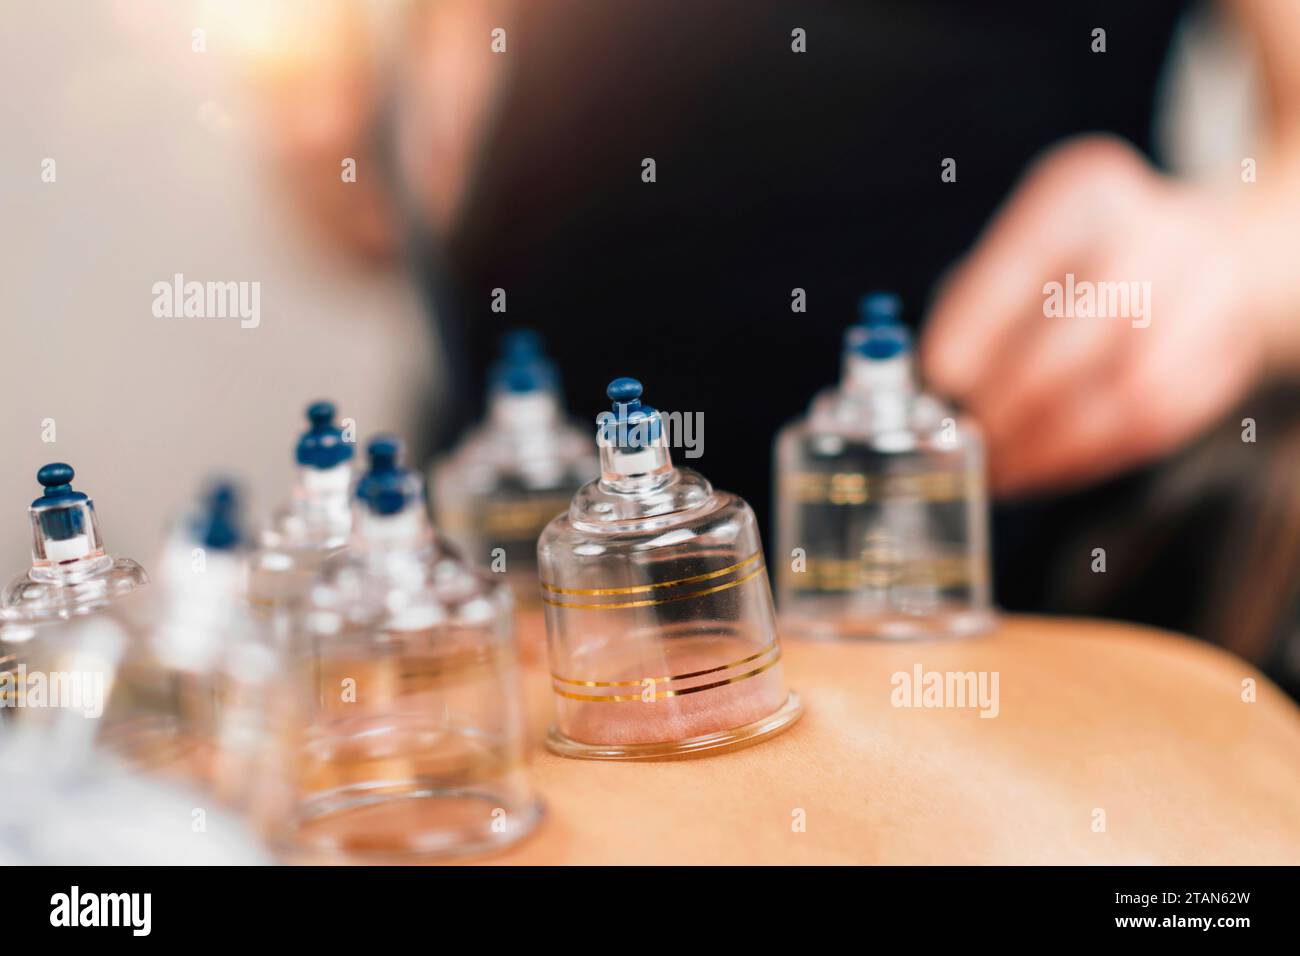 Cupping therapy Stock Photo